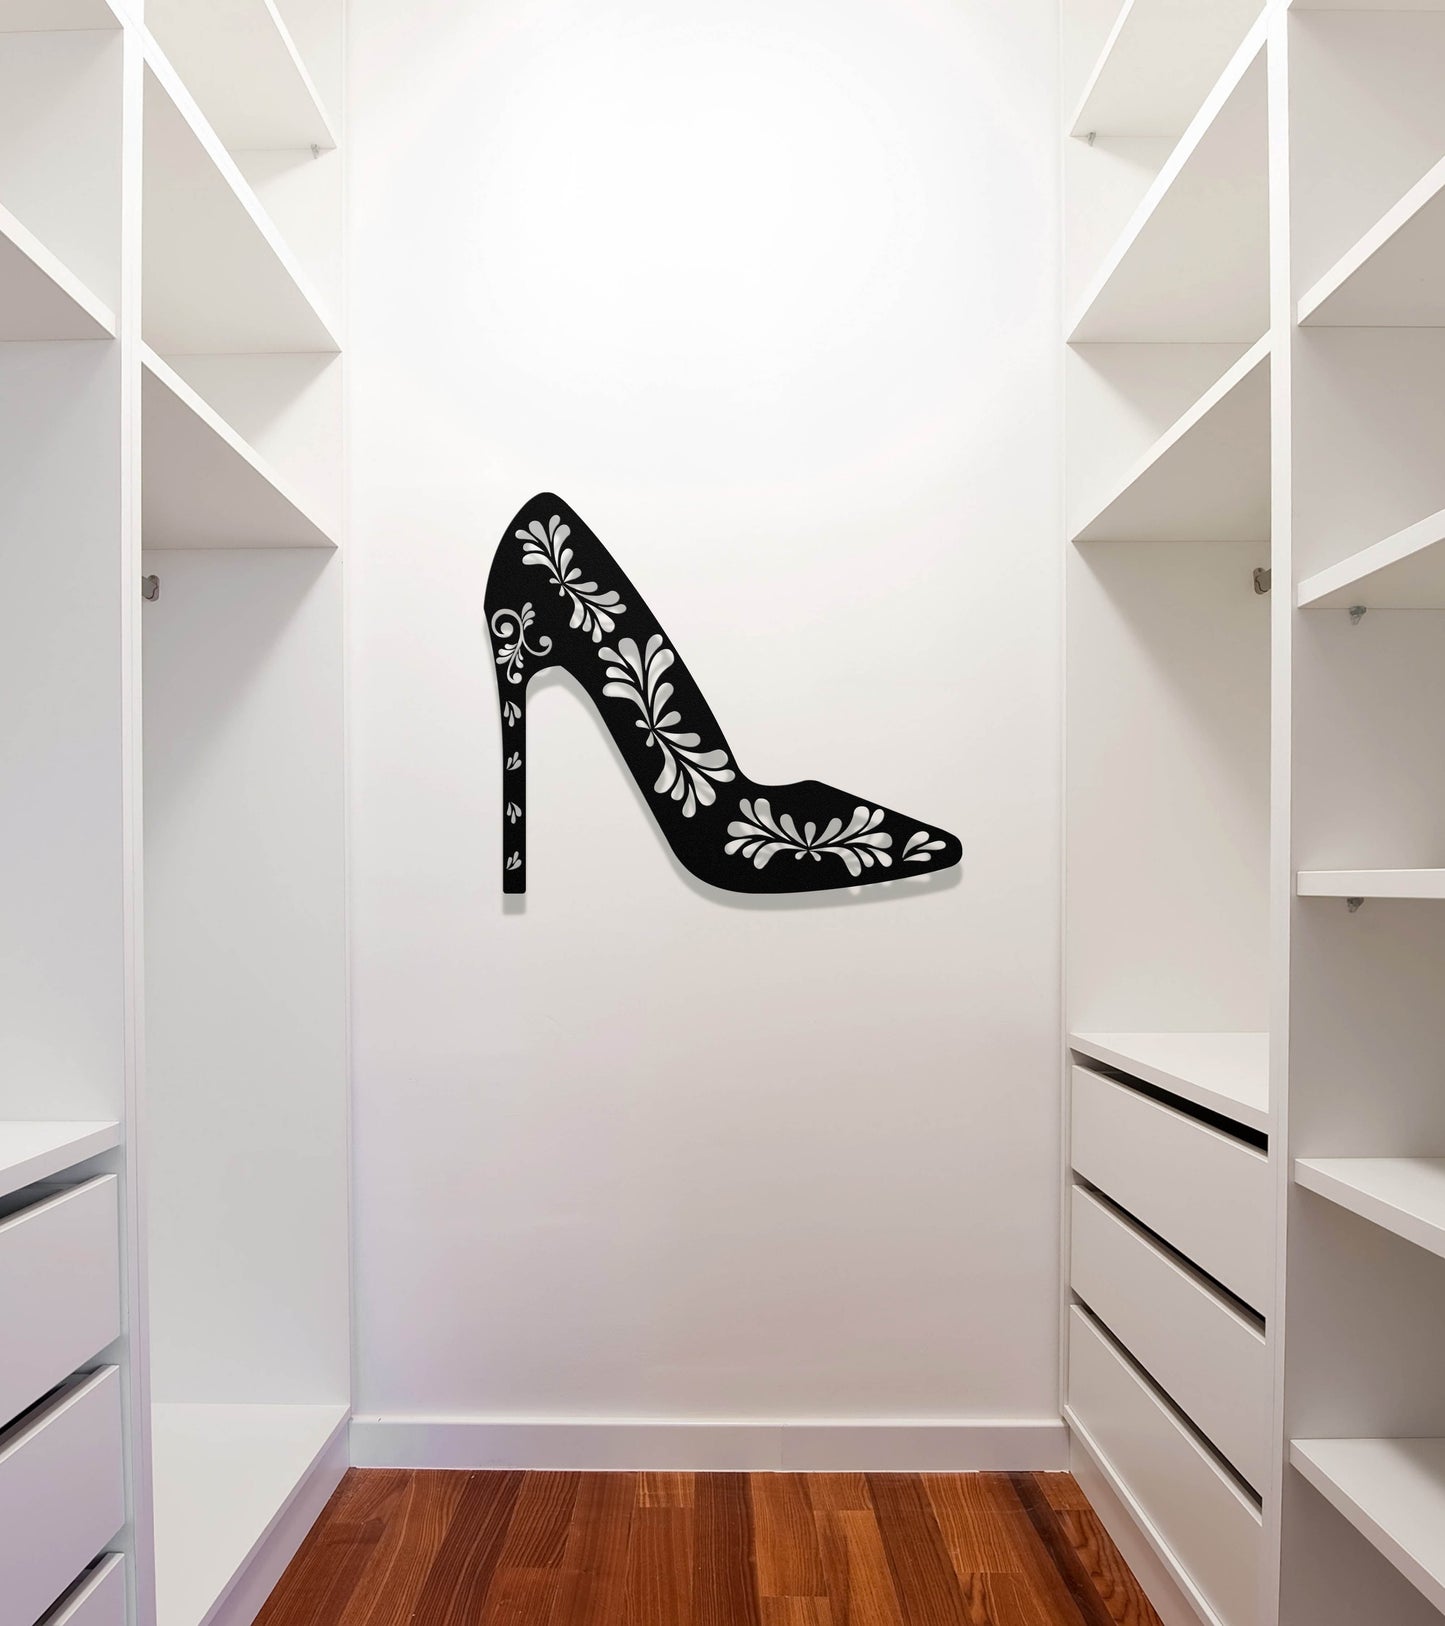 Shoe wall art with vintage pattern